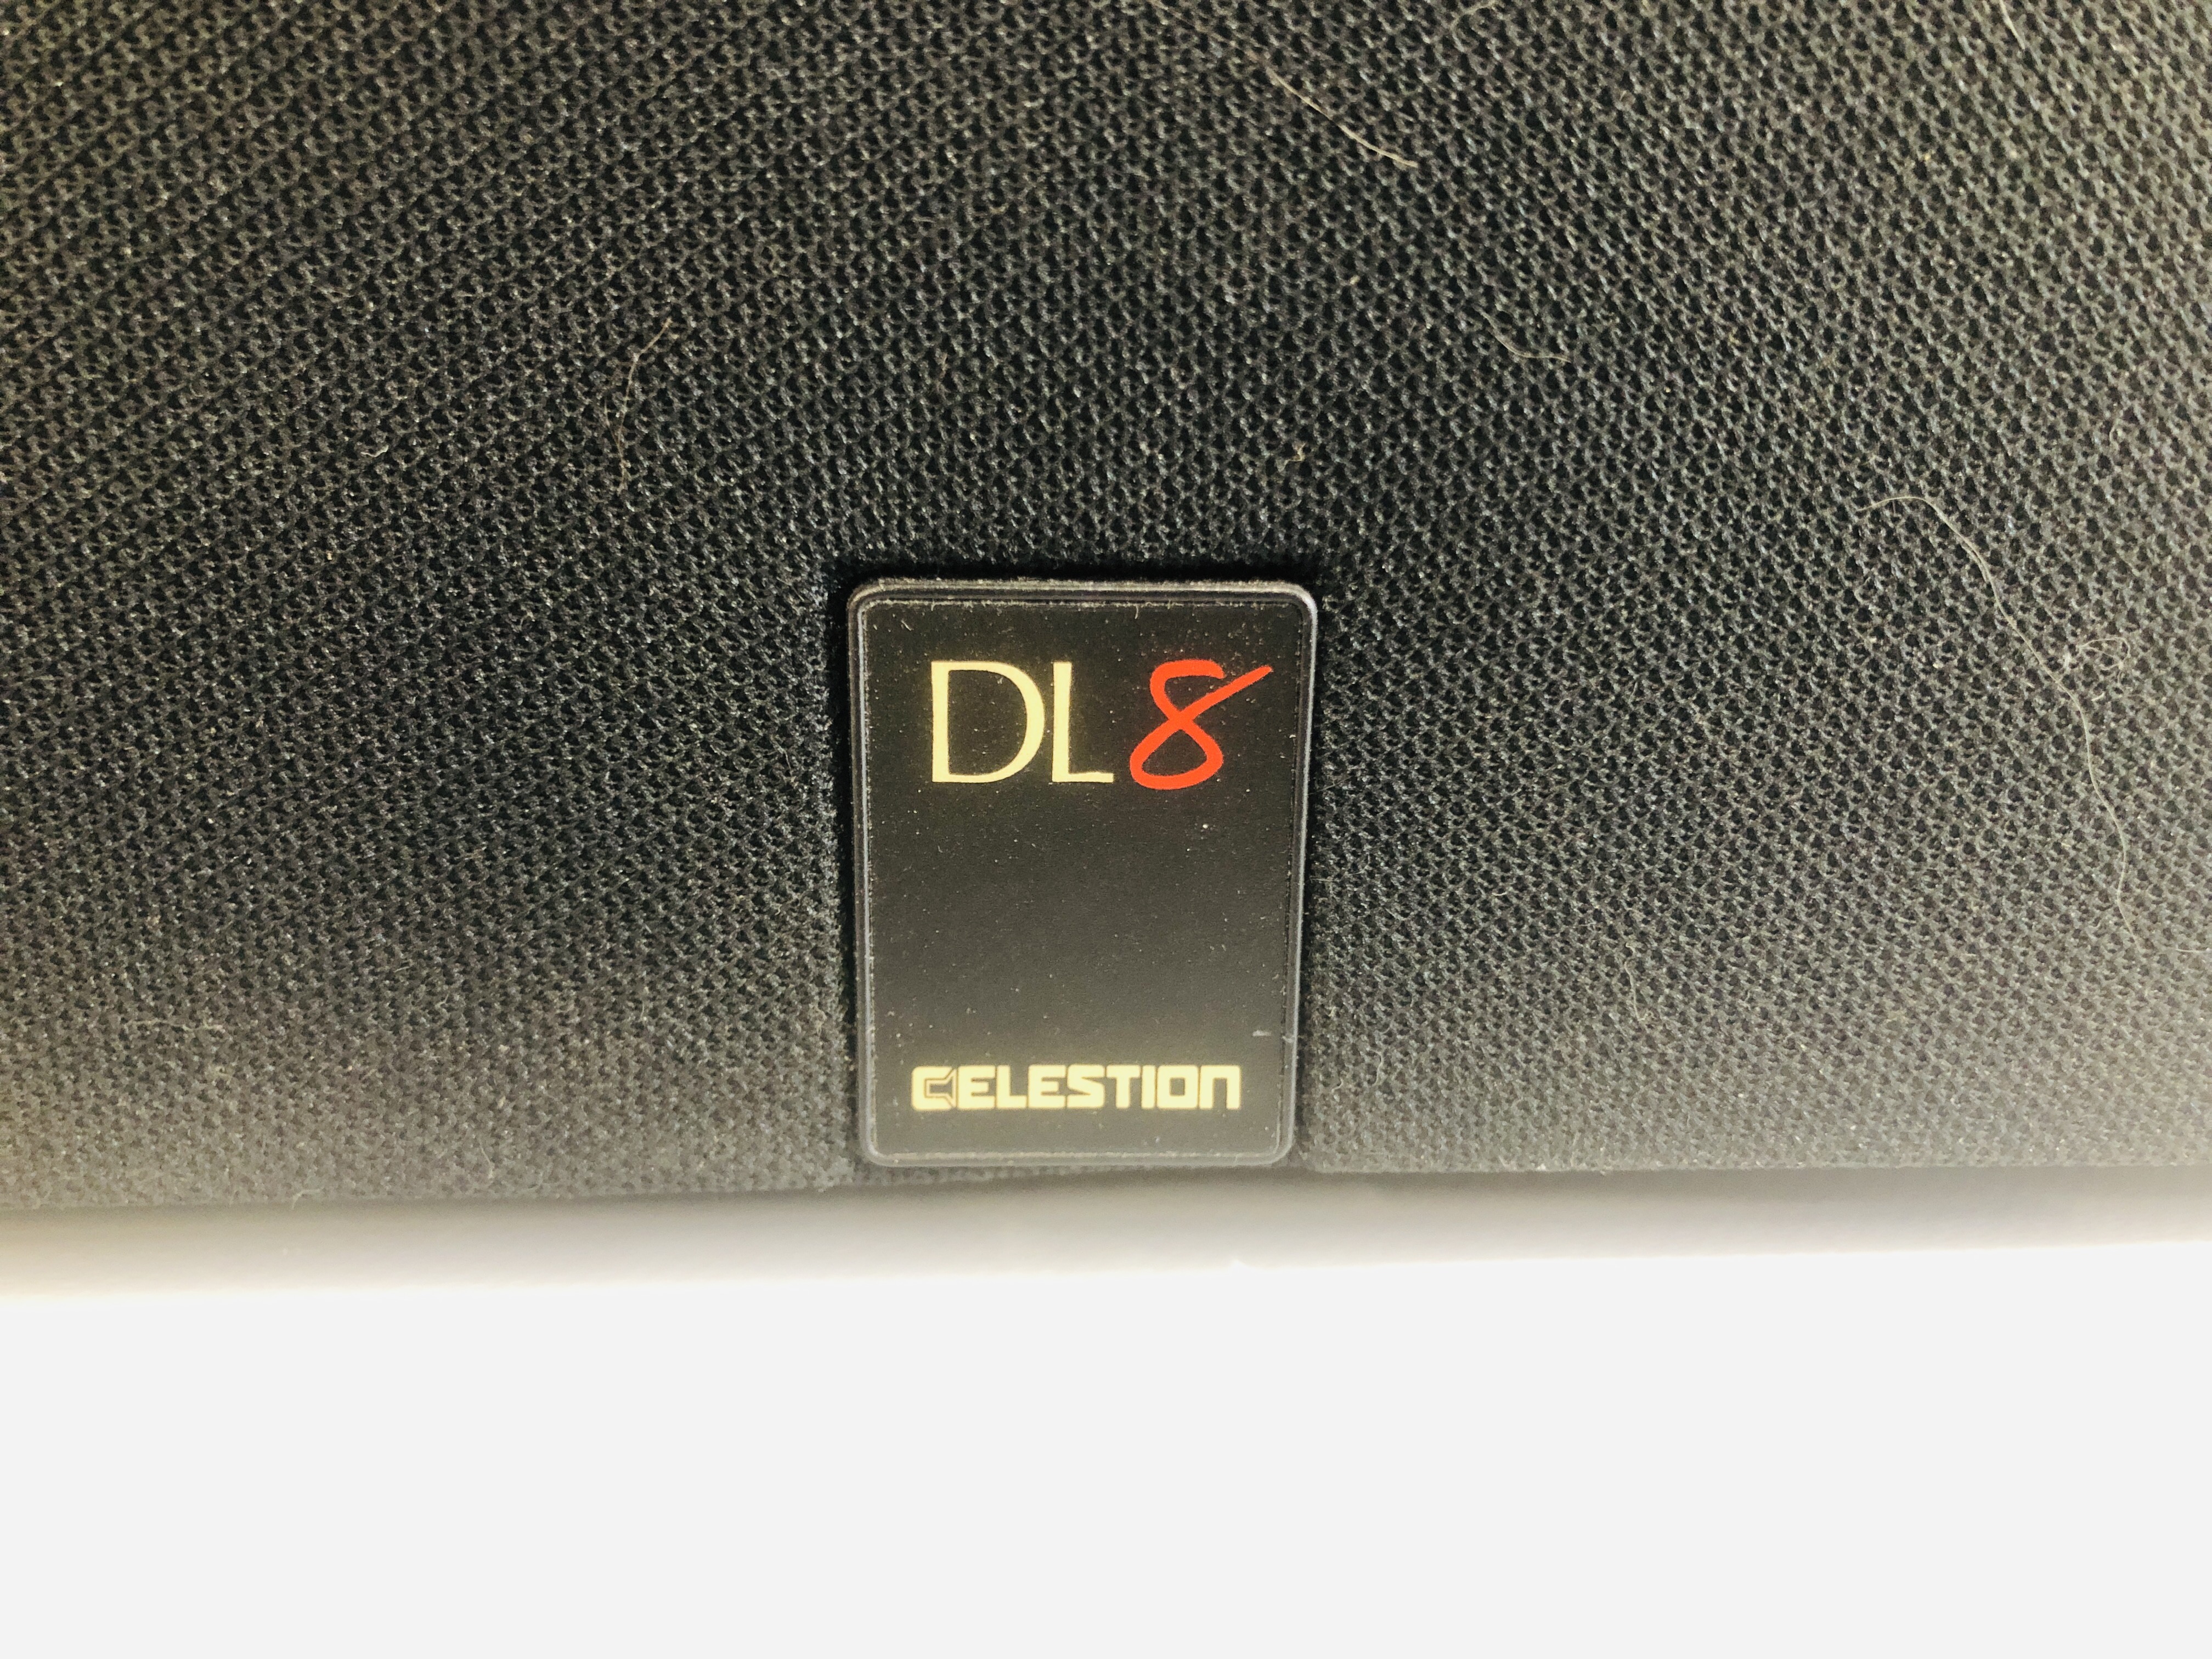 PAIR OF CELESTRON DL8 LOUDSPEAKERS (BLACK ASH FINISH CABINETS) - SOLD AS SEEN - Image 3 of 5